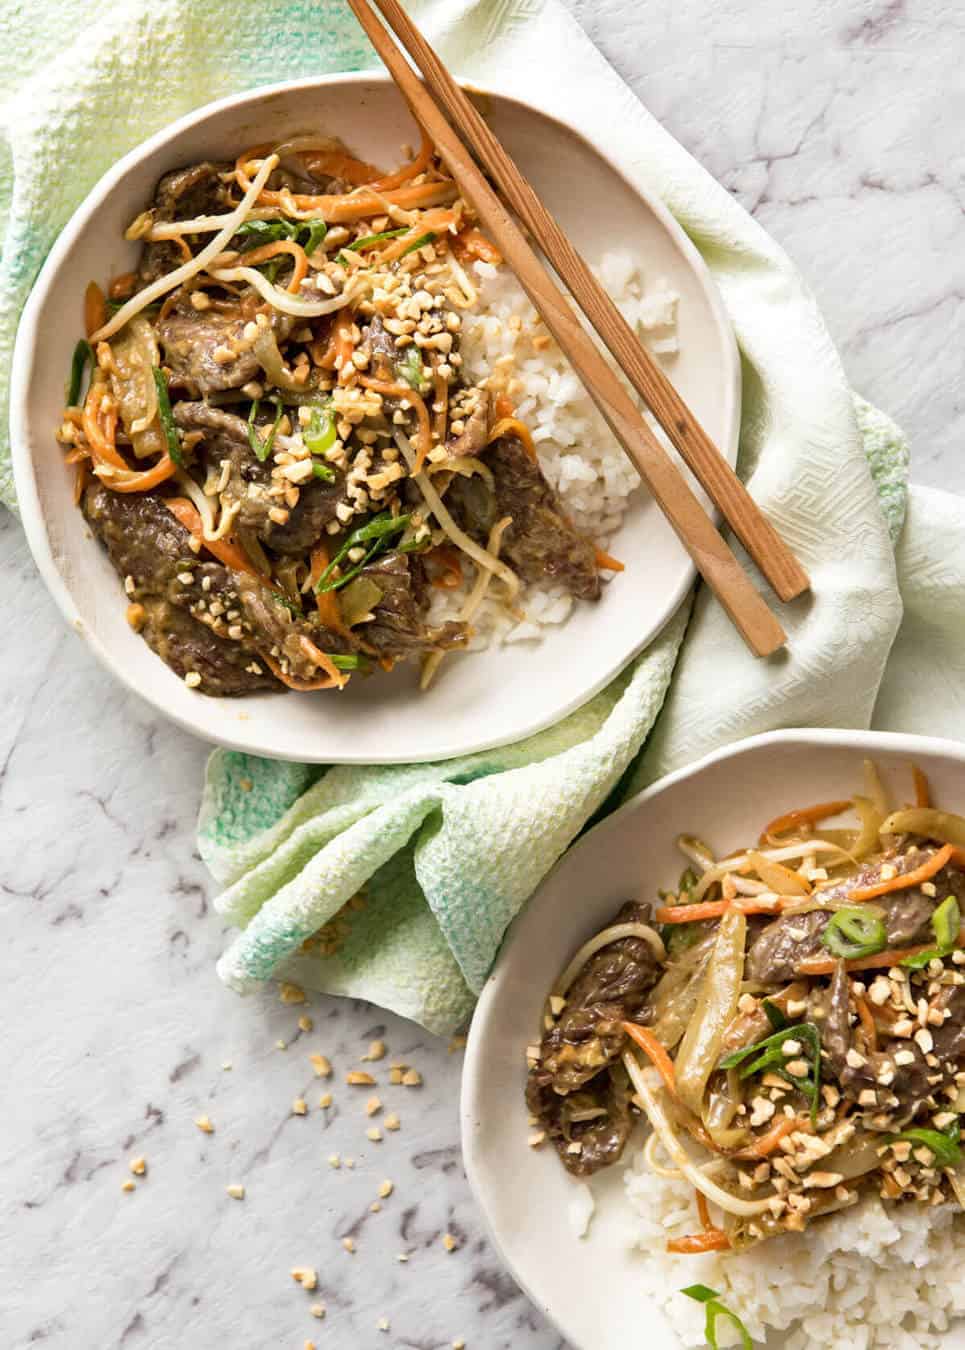 This Satay Peanut Stir Fry is almost too good to be true - it's SO FAST and SO EASY and tastes incredible! recipetineats.com